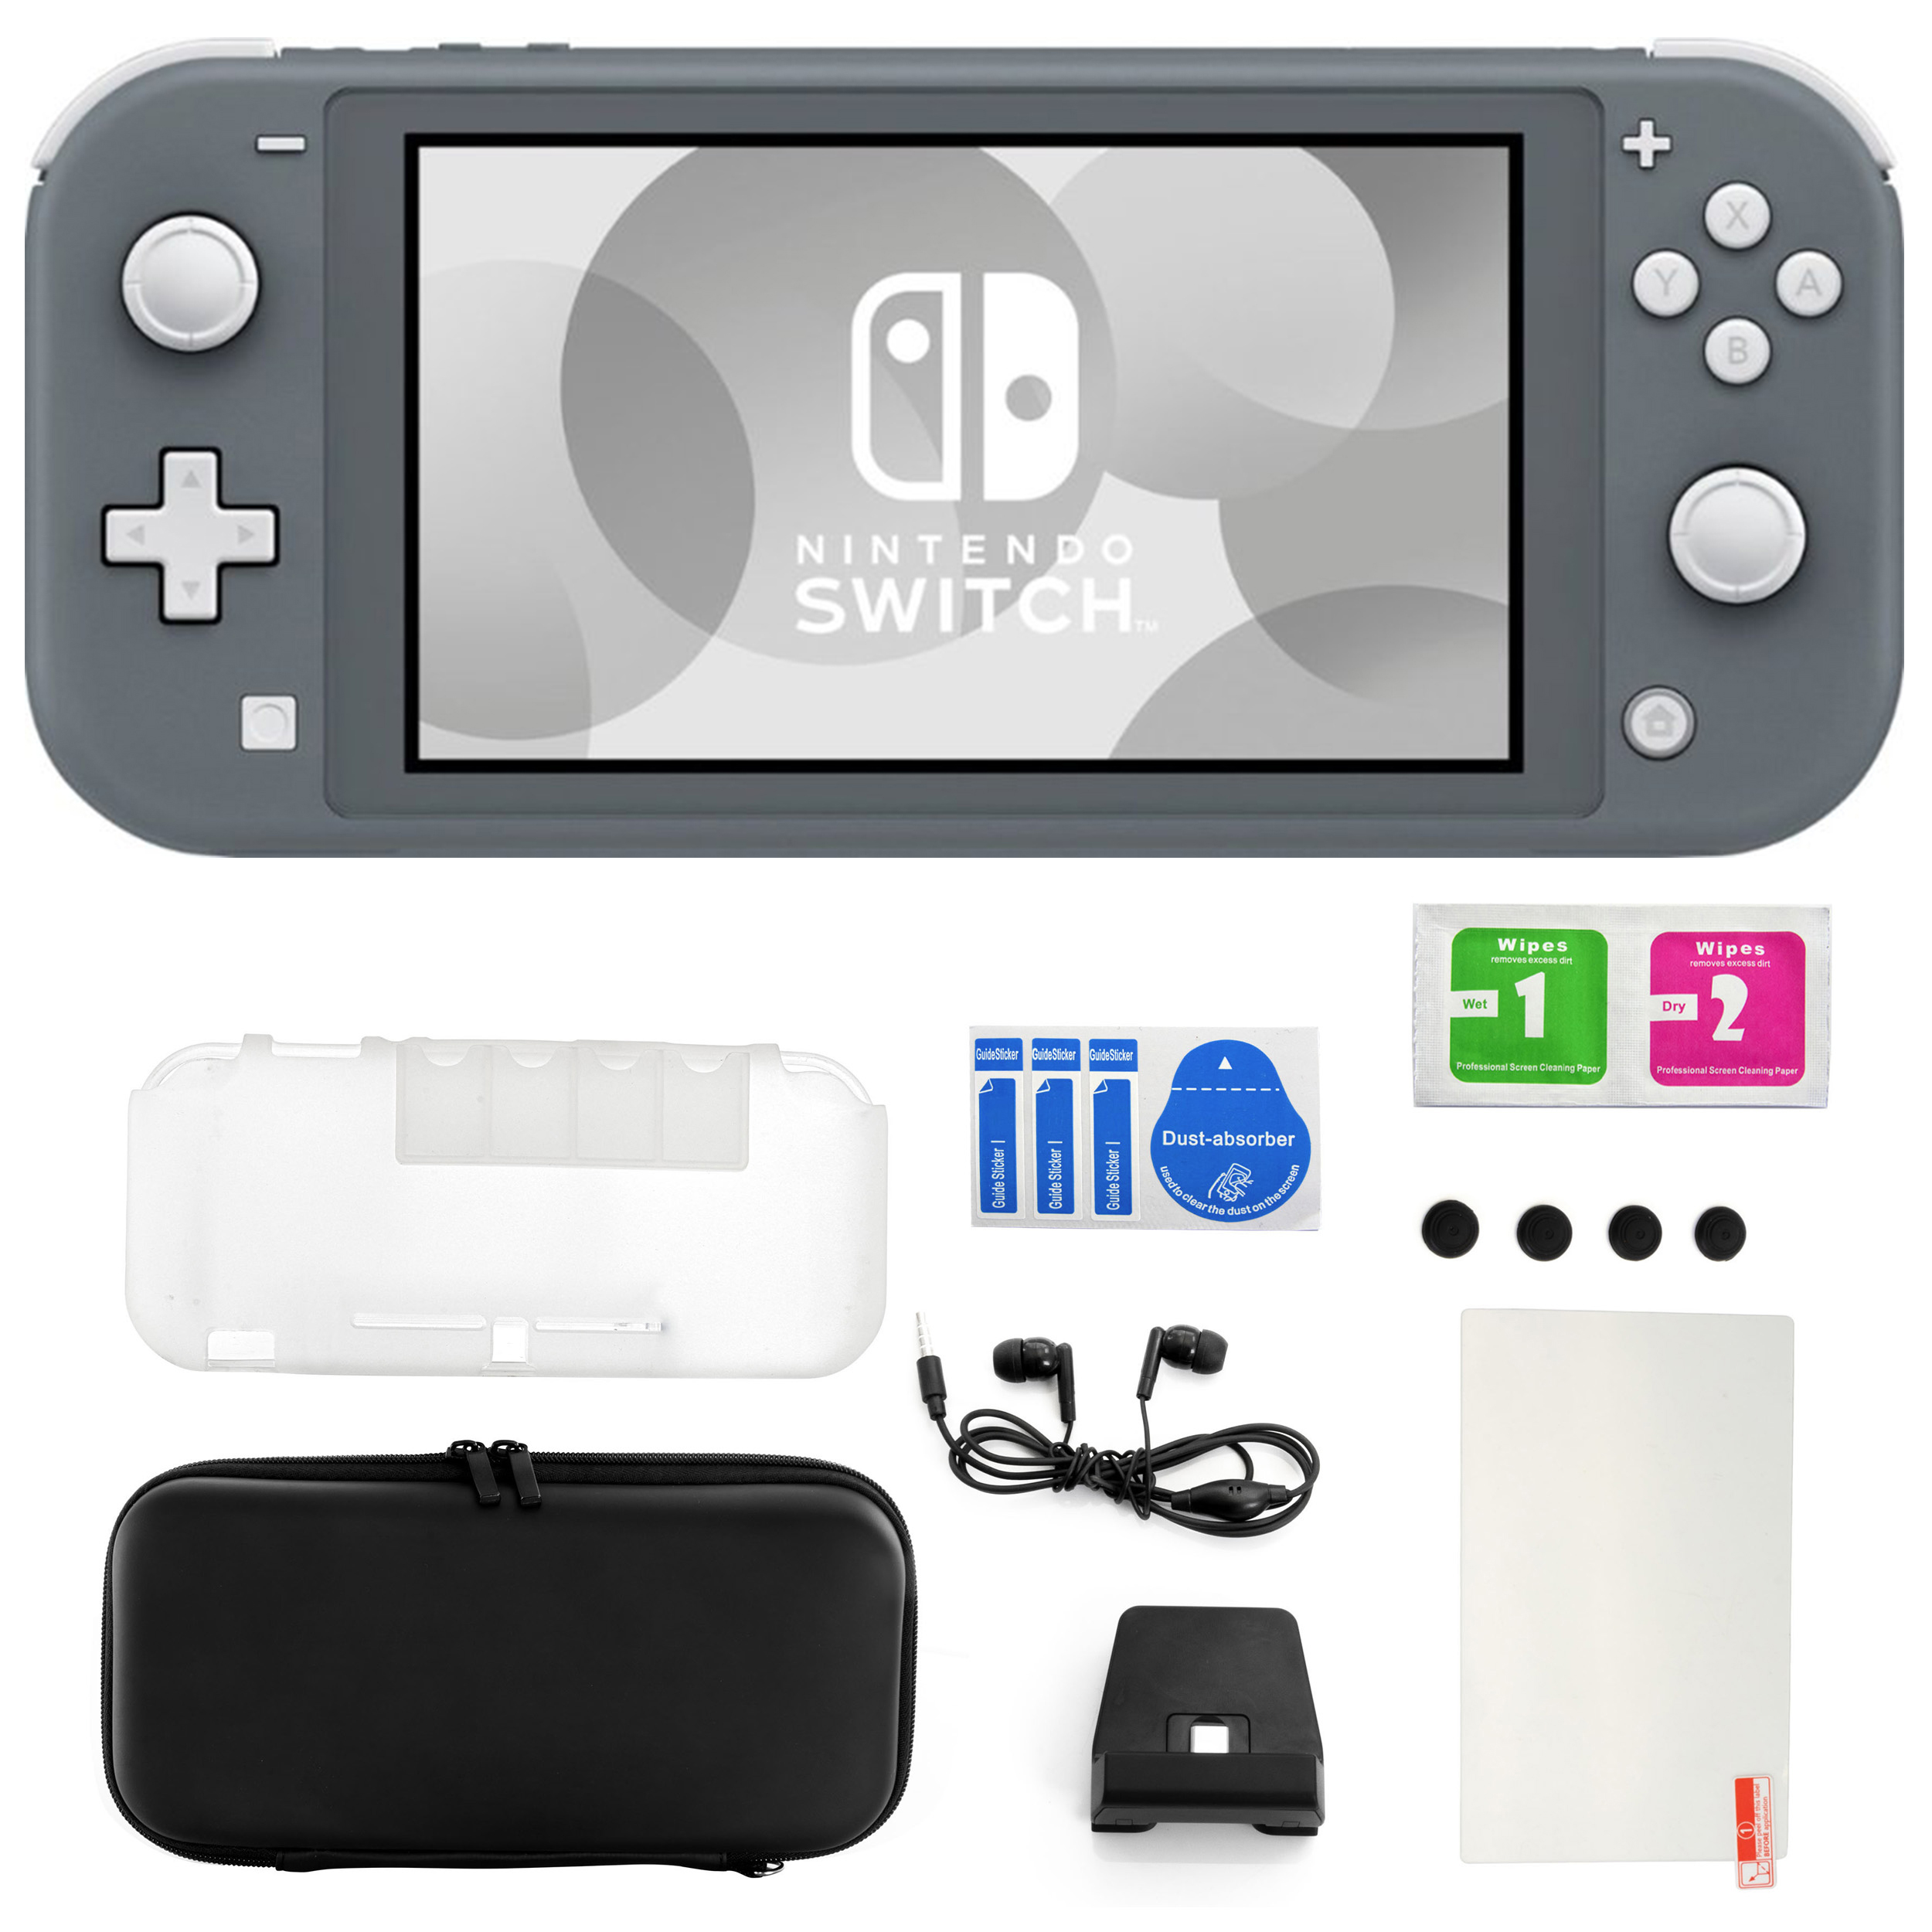 Nintendo Switch Lite in Gray with 11 in 1 Accessories Kit - image 1 of 1